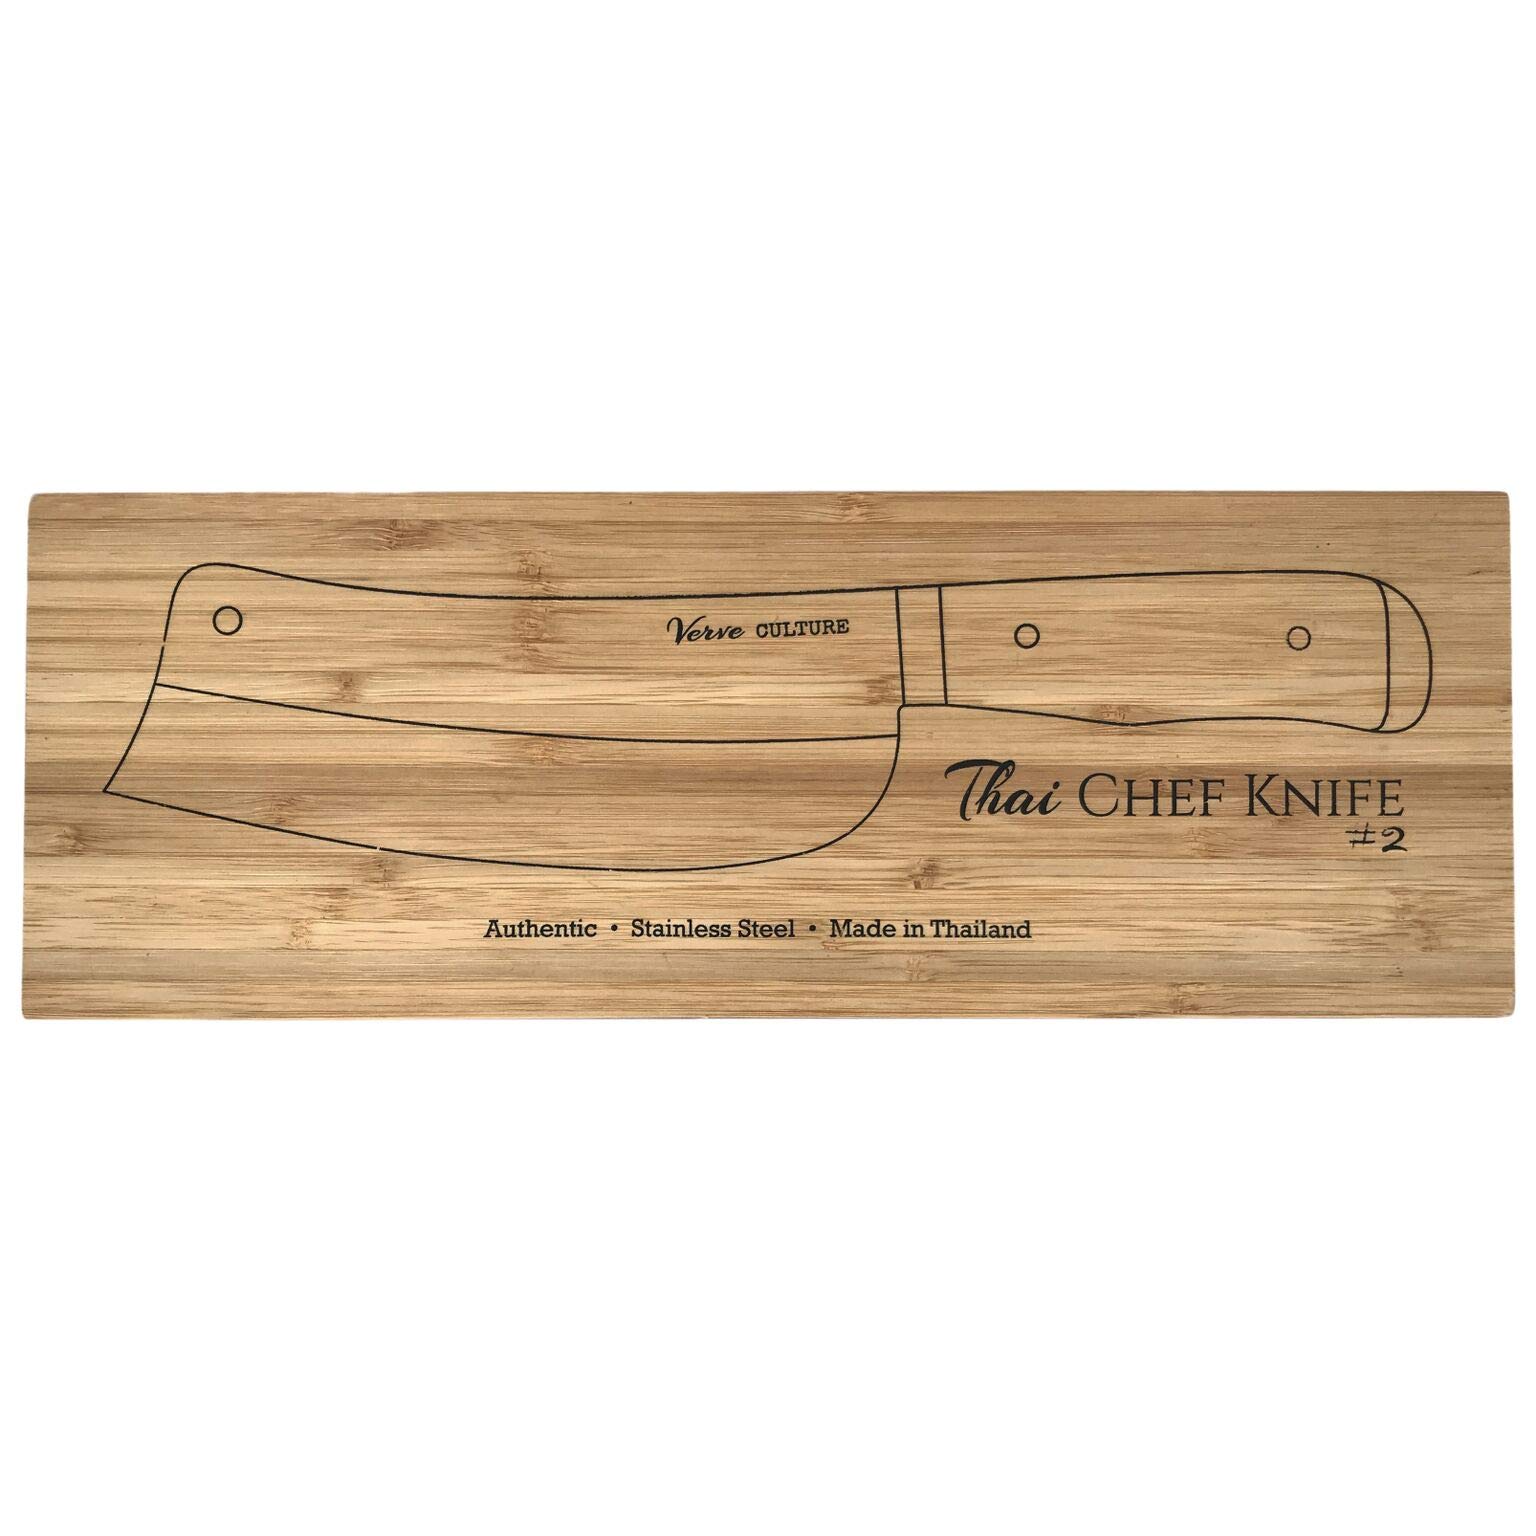 Verve Culture Artisan Stainless Steel Thai Chef's Knife #2 - Authentic Hand Crafted in Thailand